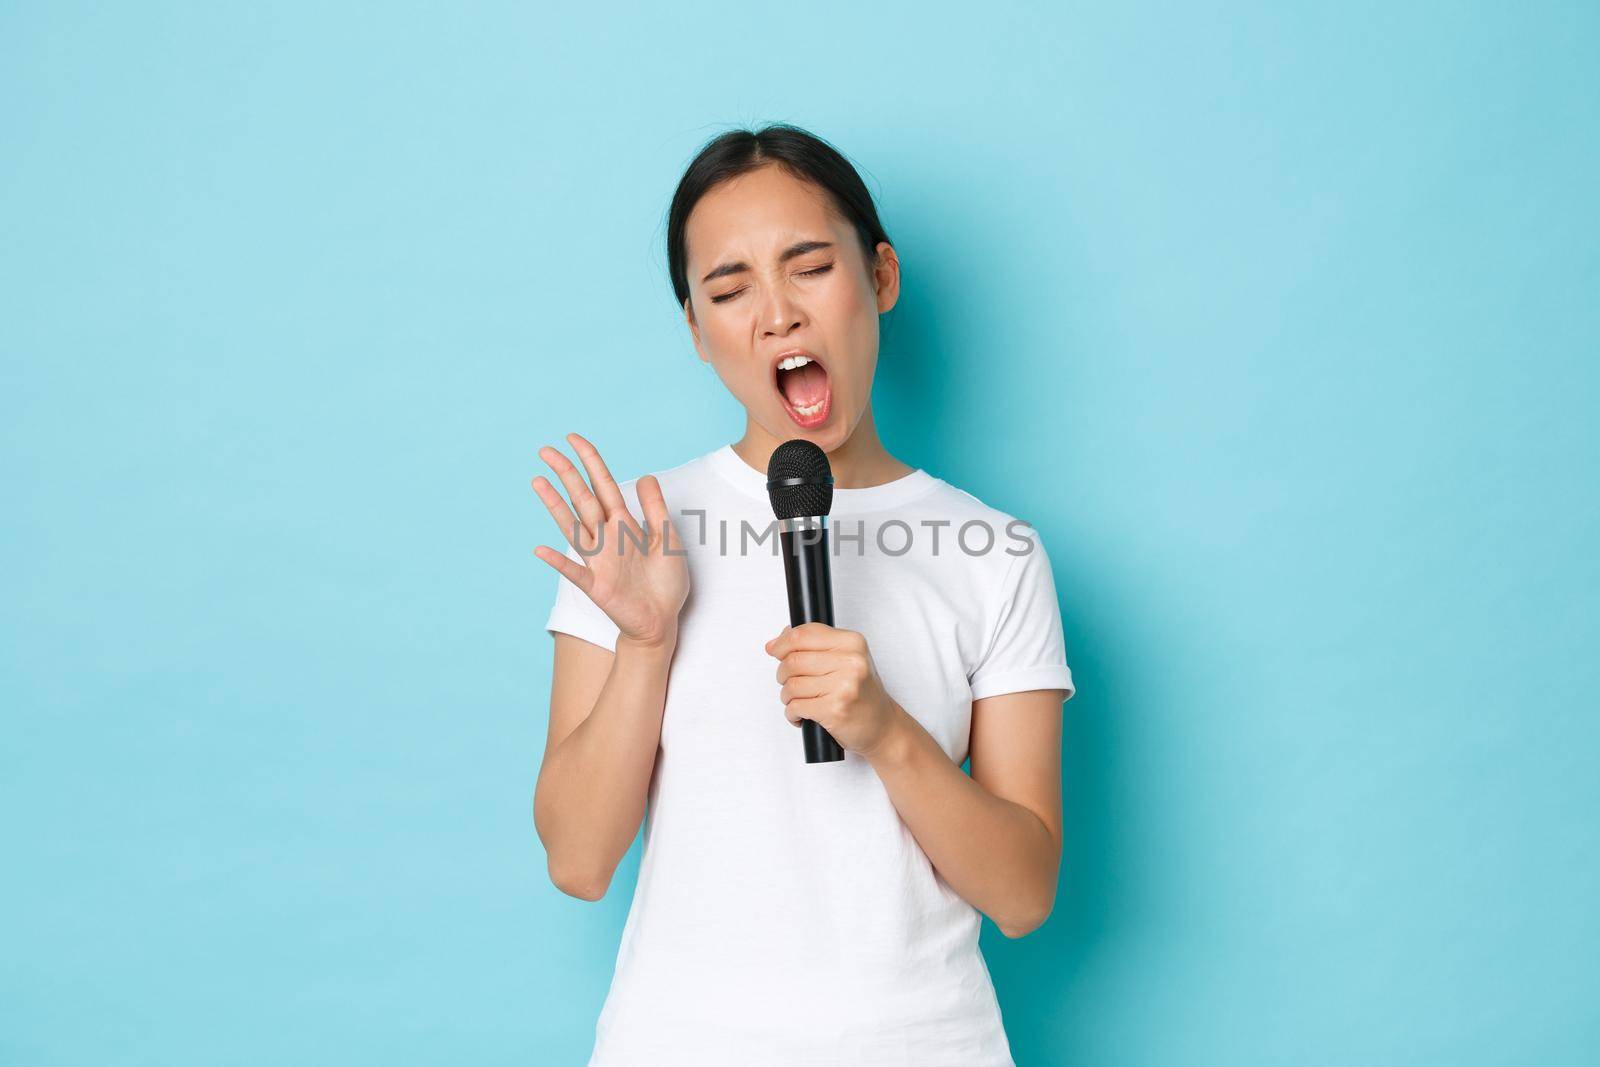 Lifestyle, people and leisure concept. Carefree beautiful asian girl singing sing in microphone with passionate expression, close eyes and gesturing while performing, like karaoke.